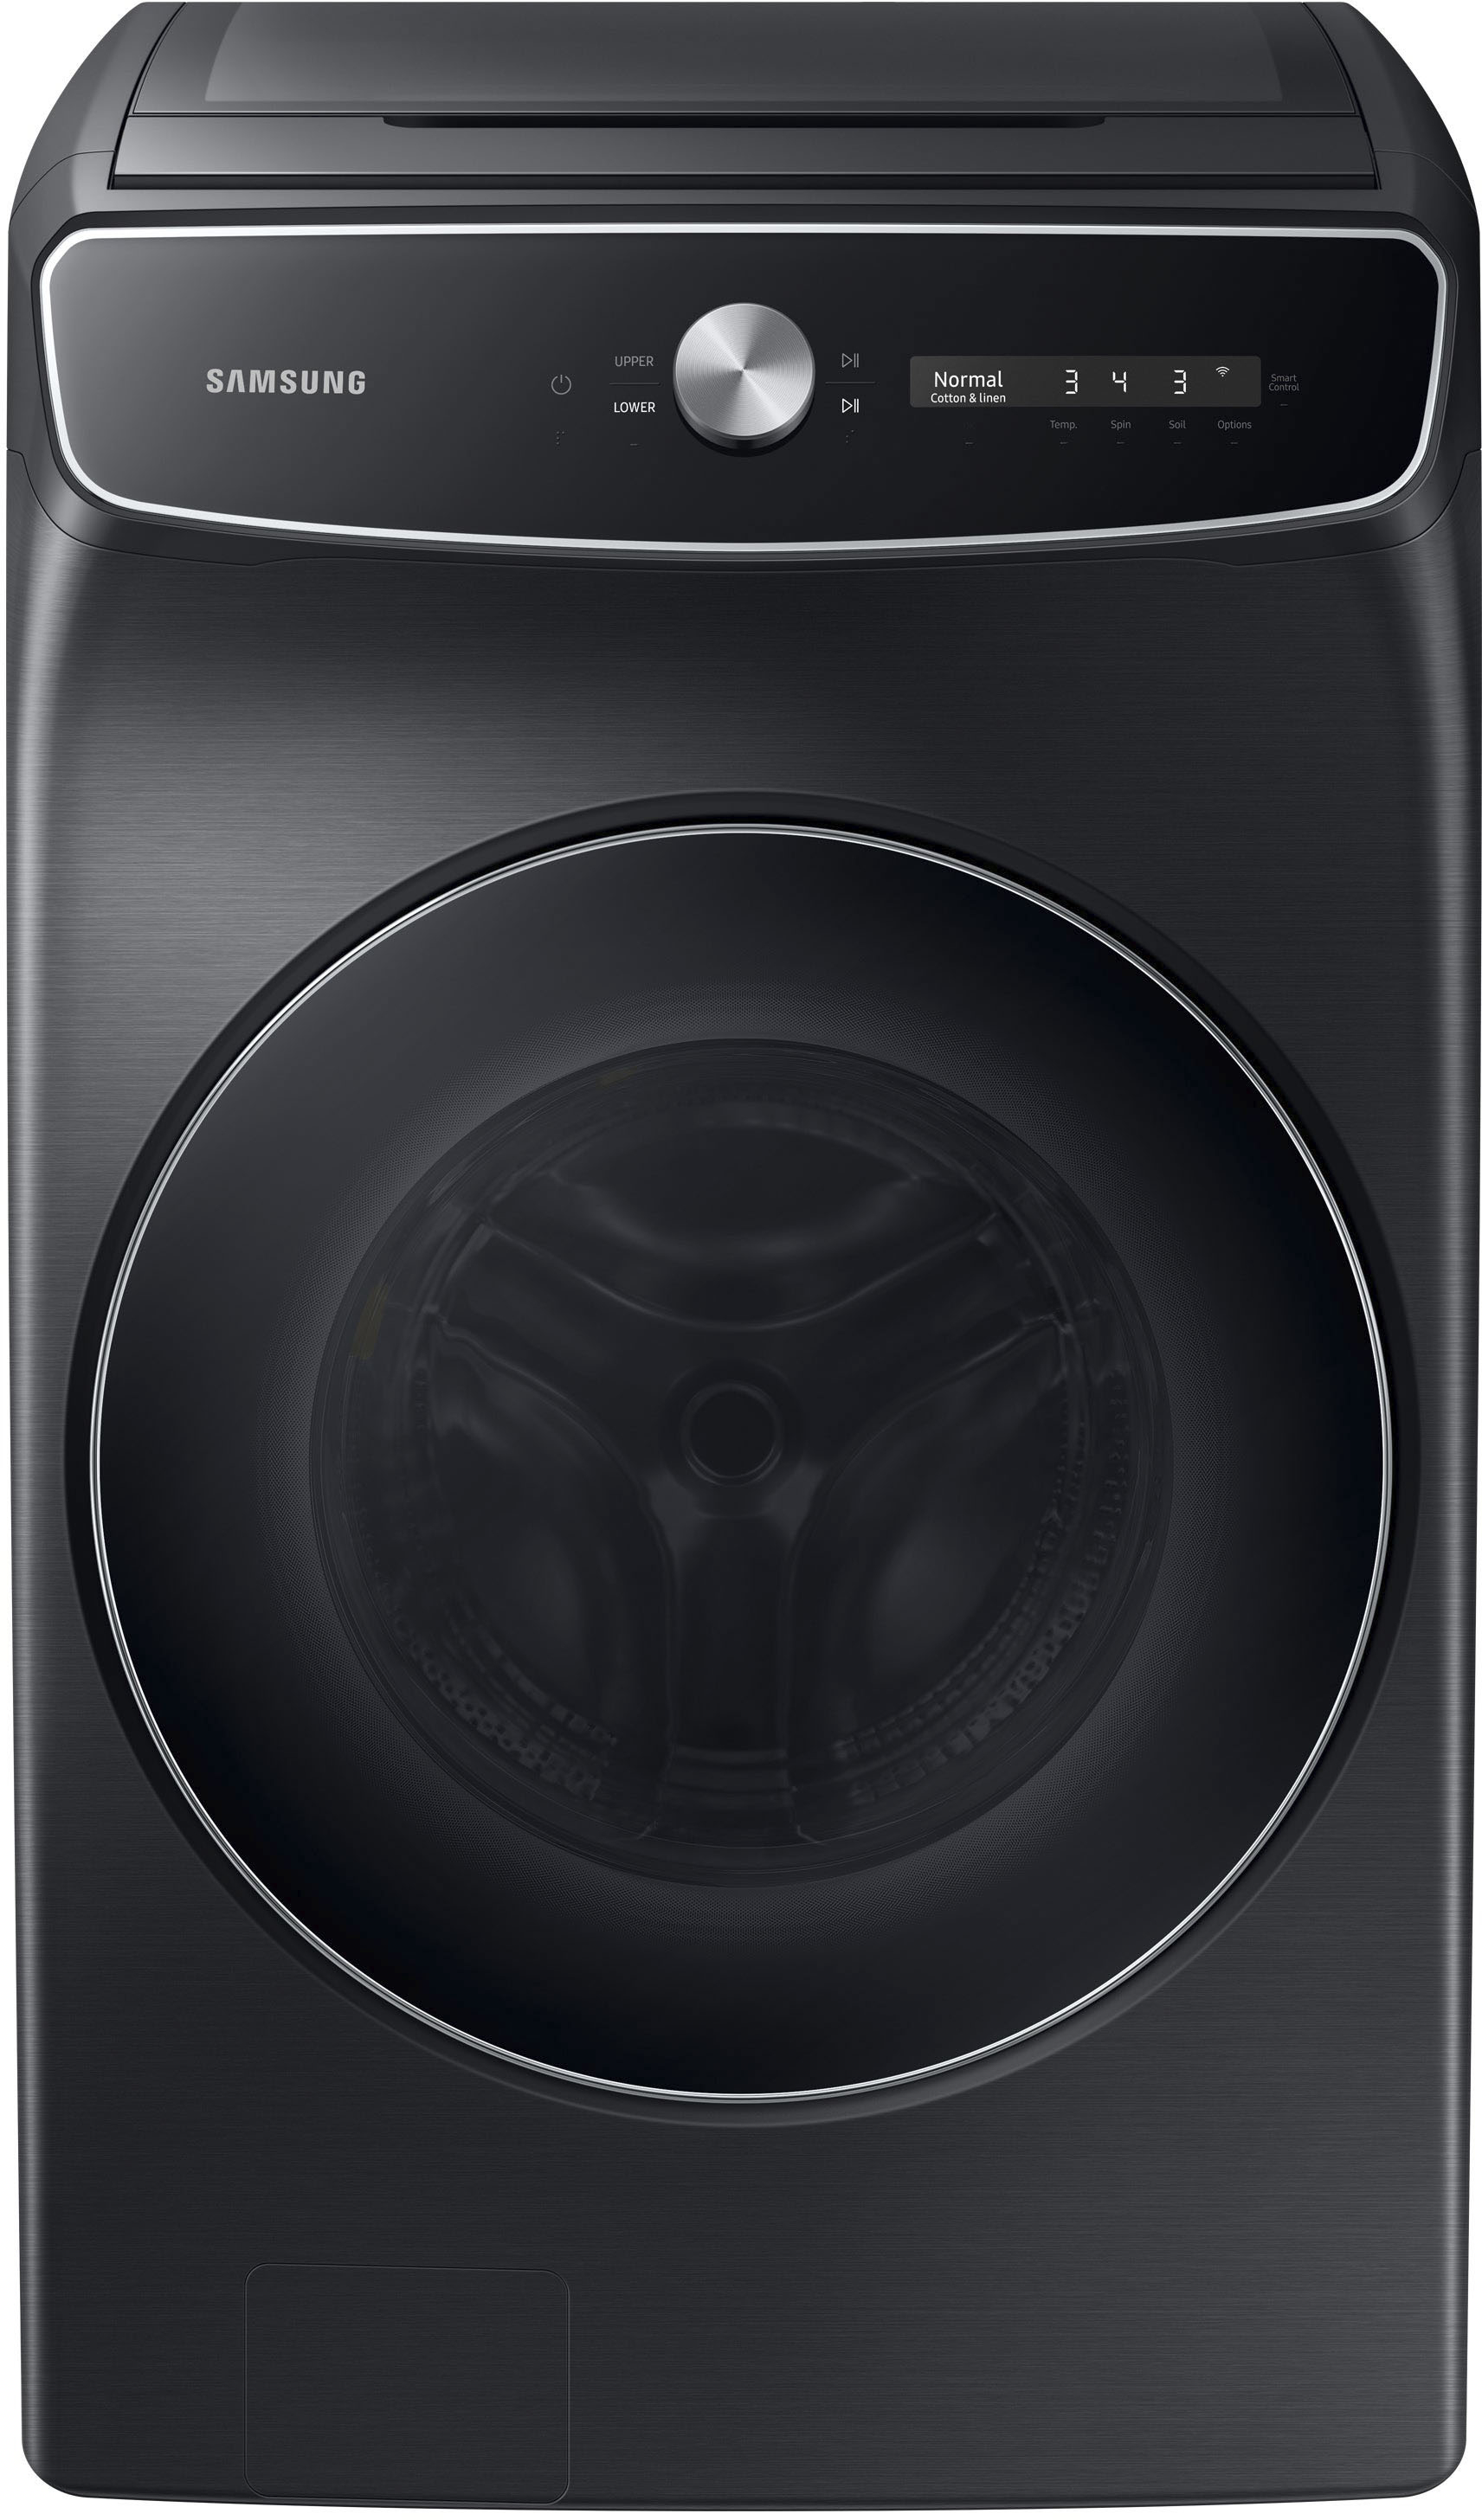 Samsung - 6.0 cu. ft. Total Capacity Smart Dial Washer with FlexWash™ and Super Speed Wash - Brushed black